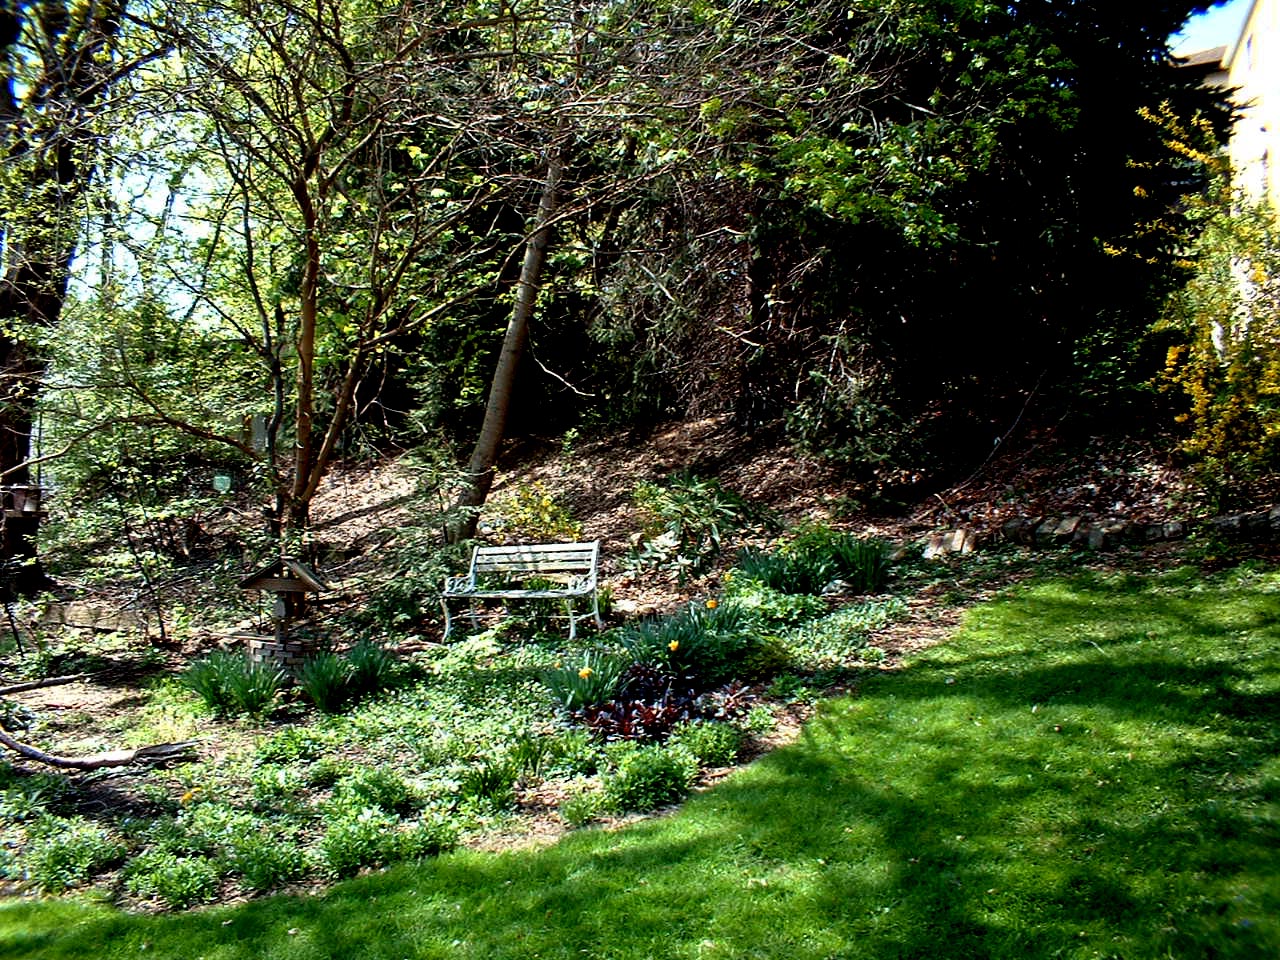 A view of the yard in spring.